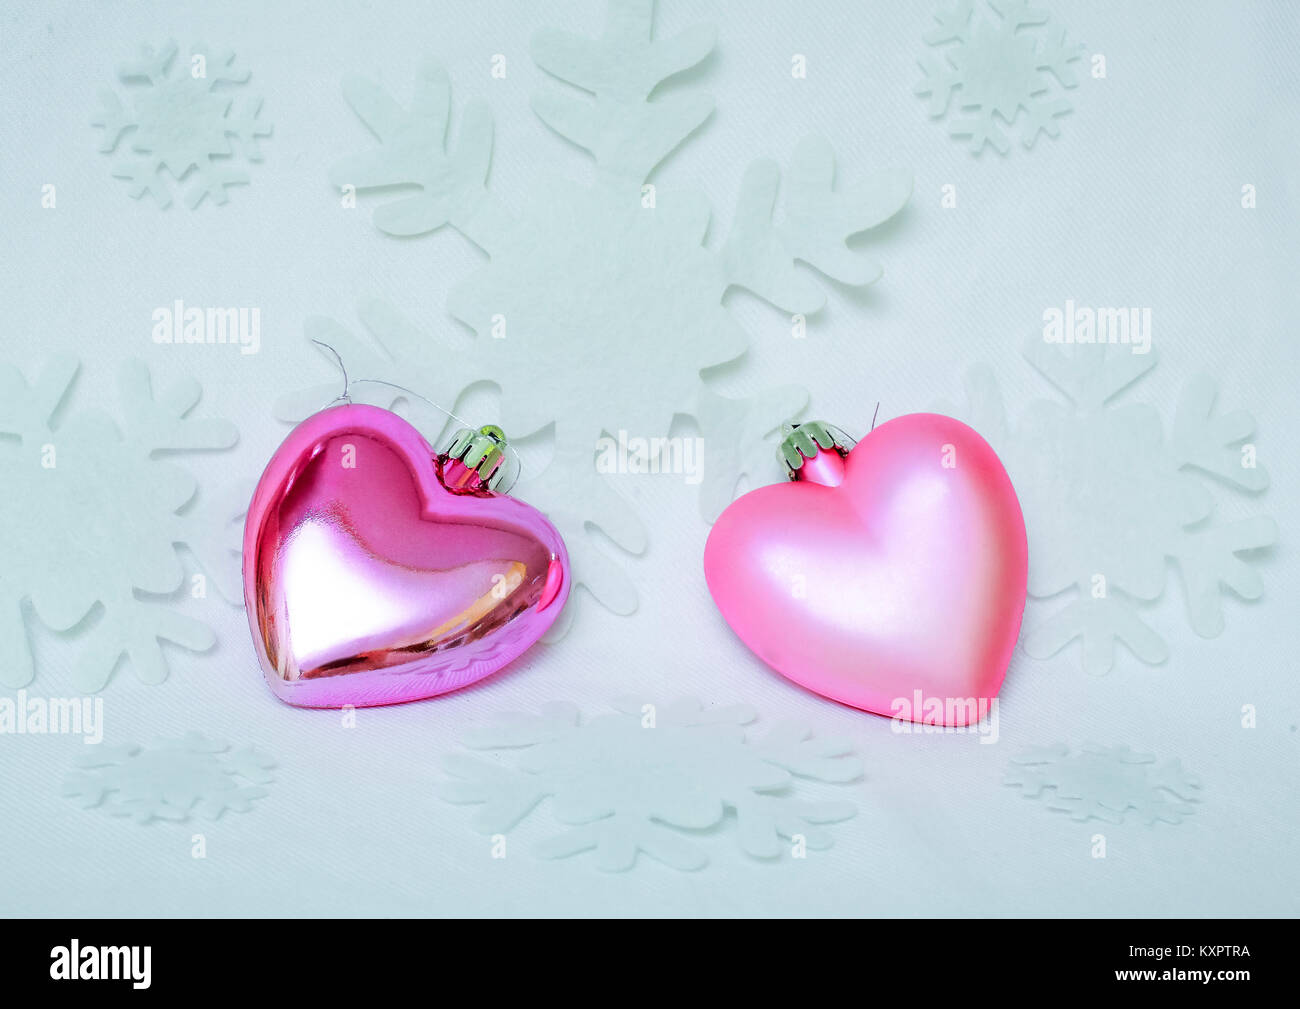 On white background of snowflakes on two sparkly pink heart - symbol of love and fidelity. Stock Photo